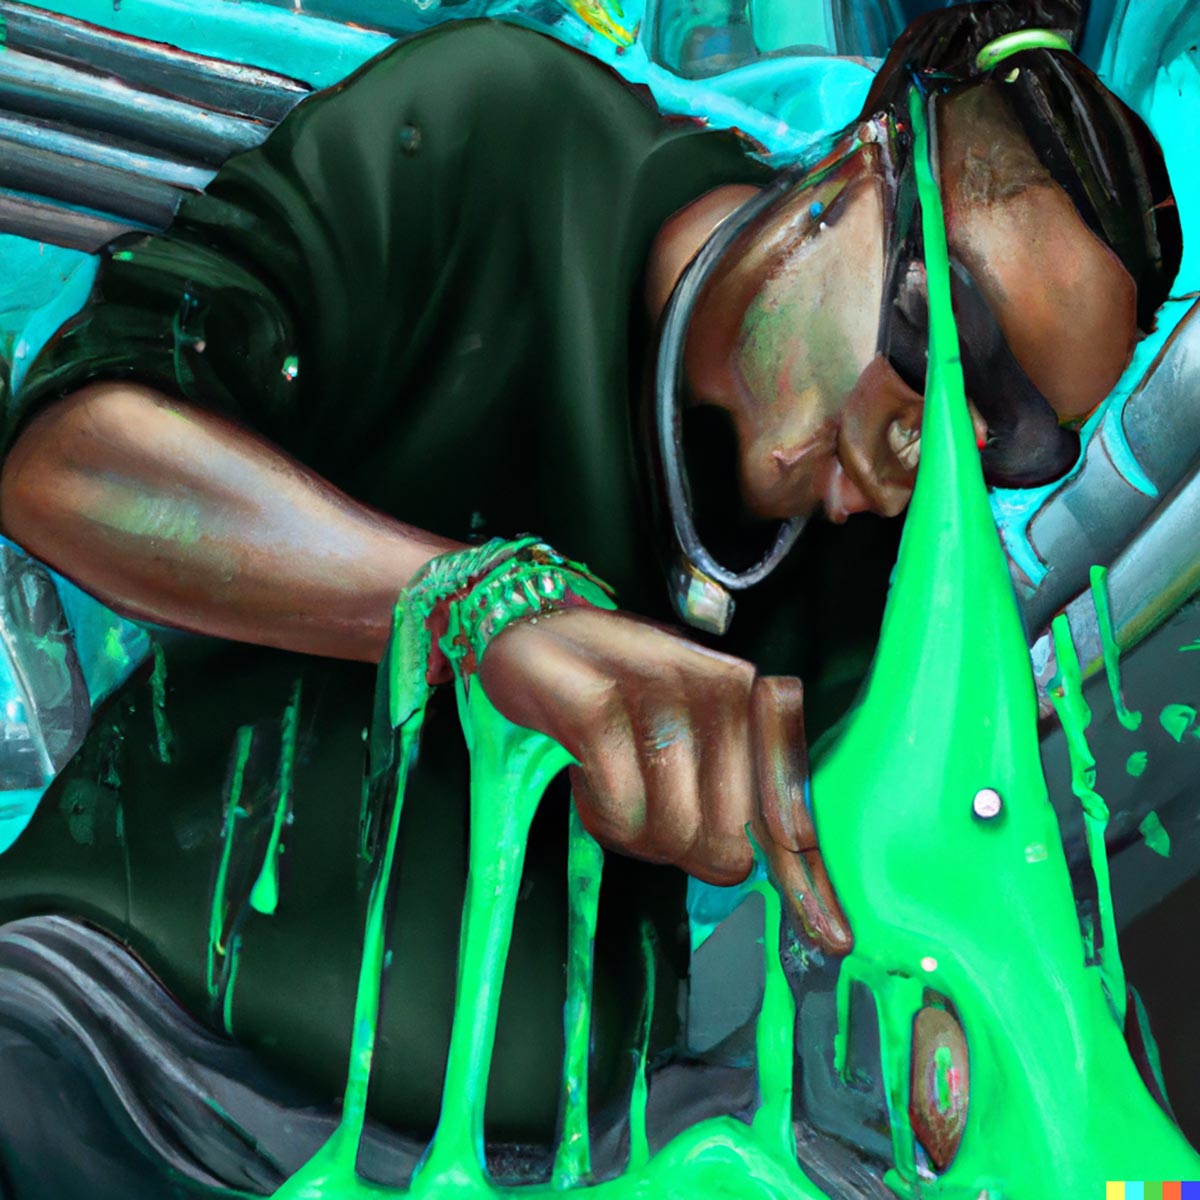 A cartoon of a young Black man with sunglasses covered in green slime.